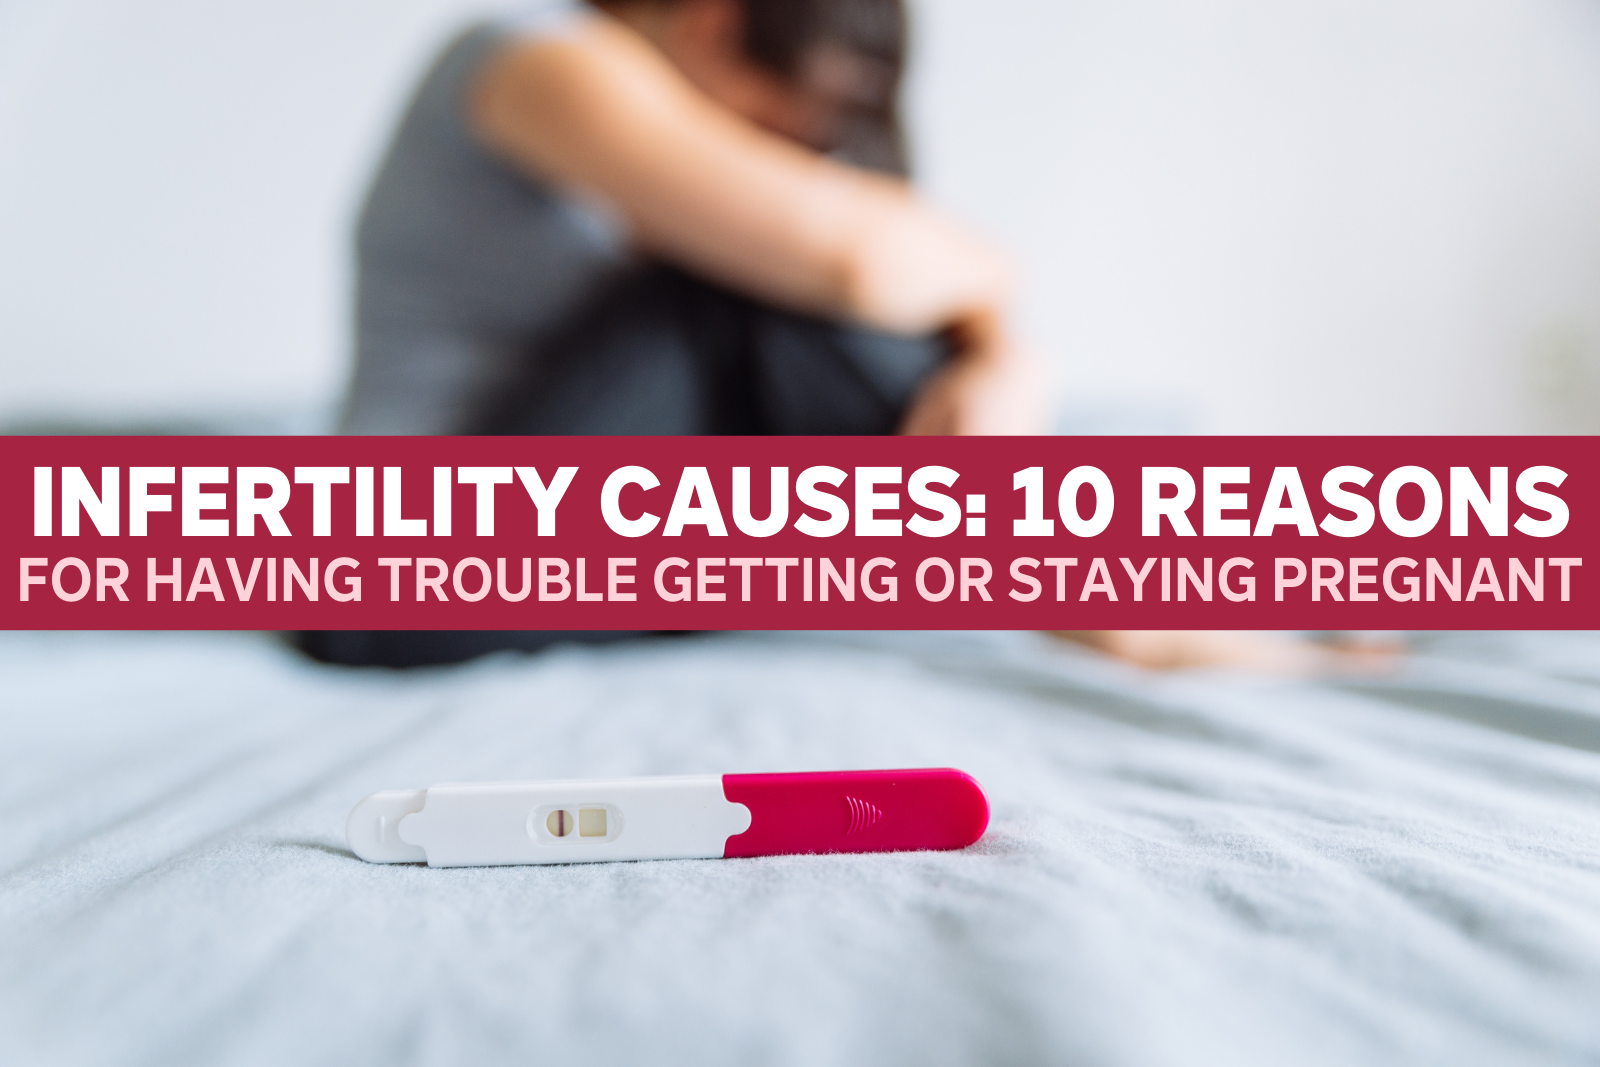 Infertility Causes: 10 Reasons You're Having Trouble Getting or Staying Pregnant